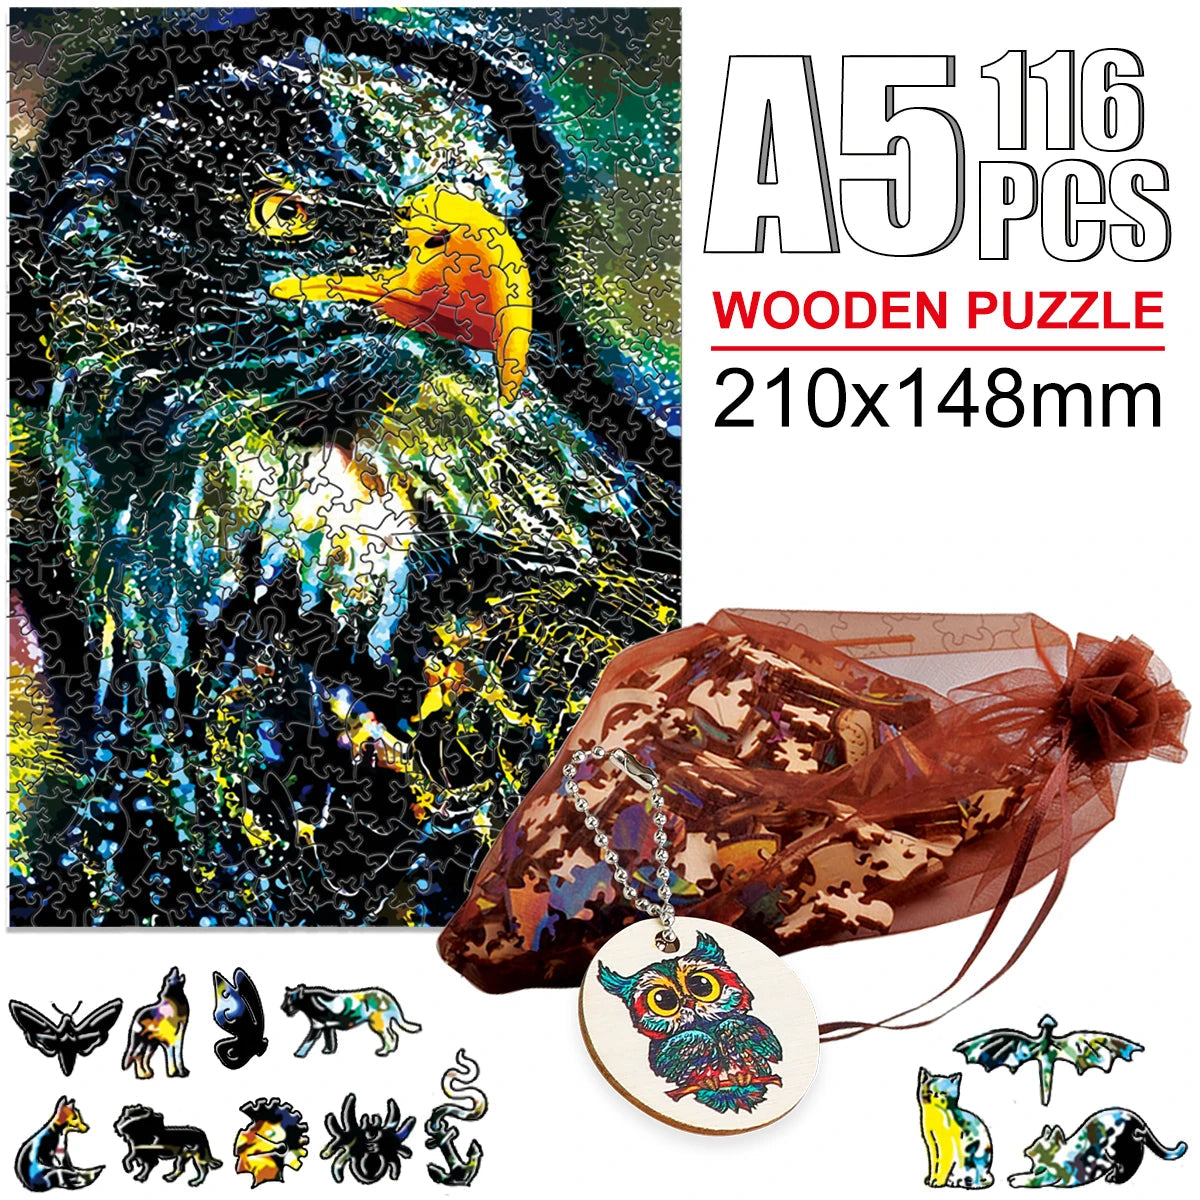 Hummingbird 3D Wooden Puzzle with Key Chain and Mesh Bag for Educational Fun - ToylandEU